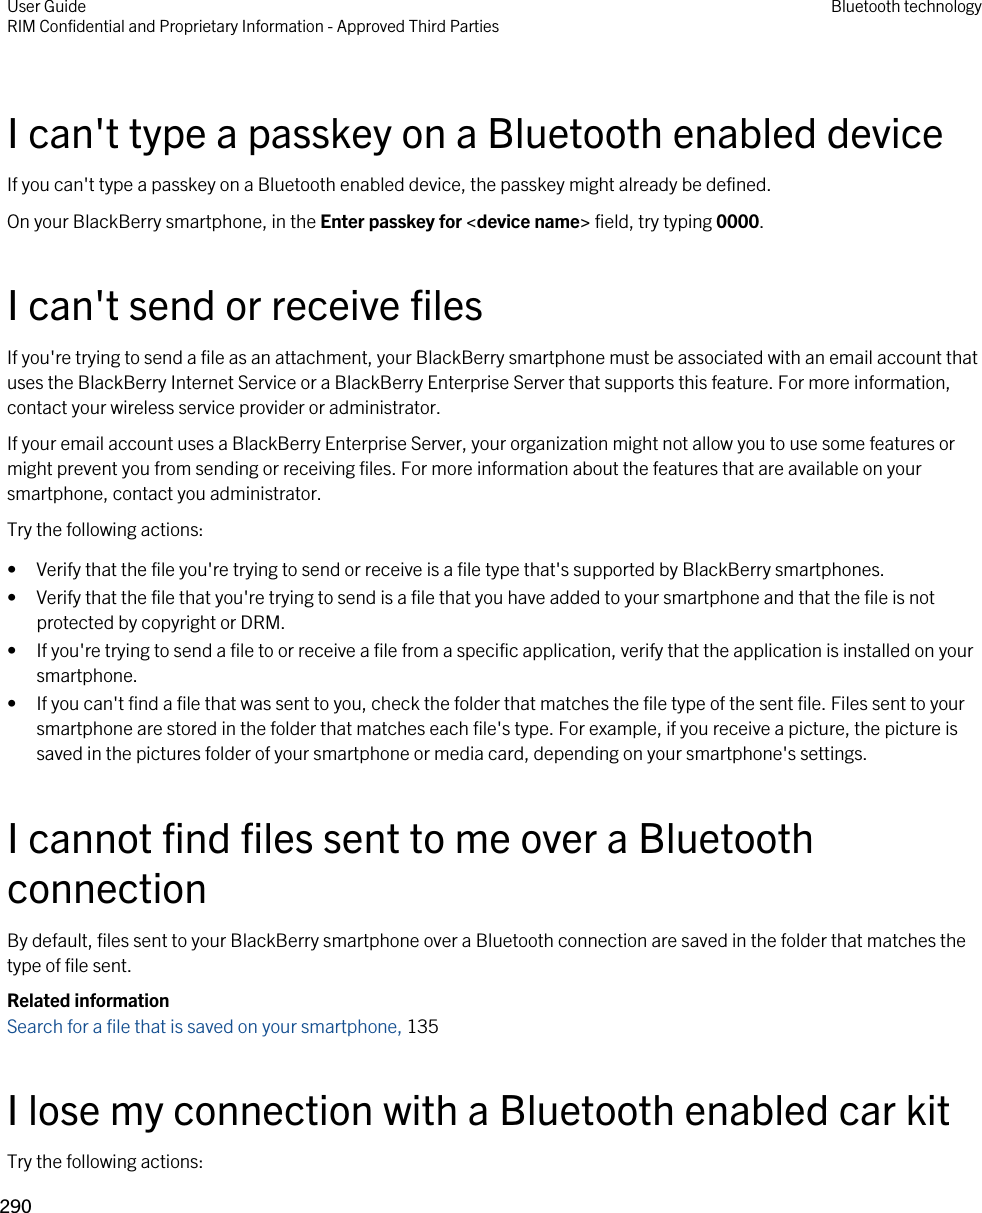 I can&apos;t type a passkey on a Bluetooth enabled deviceIf you can&apos;t type a passkey on a Bluetooth enabled device, the passkey might already be defined.On your BlackBerry smartphone, in the Enter passkey for &lt;device name&gt; field, try typing 0000.I can&apos;t send or receive filesIf you&apos;re trying to send a file as an attachment, your BlackBerry smartphone must be associated with an email account that uses the BlackBerry Internet Service or a BlackBerry Enterprise Server that supports this feature. For more information, contact your wireless service provider or administrator.If your email account uses a BlackBerry Enterprise Server, your organization might not allow you to use some features or might prevent you from sending or receiving files. For more information about the features that are available on your smartphone, contact you administrator.Try the following actions:• Verify that the file you&apos;re trying to send or receive is a file type that&apos;s supported by BlackBerry smartphones.• Verify that the file that you&apos;re trying to send is a file that you have added to your smartphone and that the file is not protected by copyright or DRM.• If you&apos;re trying to send a file to or receive a file from a specific application, verify that the application is installed on your smartphone.• If you can&apos;t find a file that was sent to you, check the folder that matches the file type of the sent file. Files sent to your smartphone are stored in the folder that matches each file&apos;s type. For example, if you receive a picture, the picture is saved in the pictures folder of your smartphone or media card, depending on your smartphone&apos;s settings.I cannot find files sent to me over a Bluetooth connectionBy default, files sent to your BlackBerry smartphone over a Bluetooth connection are saved in the folder that matches the type of file sent.Related informationSearch for a file that is saved on your smartphone, 135 I lose my connection with a Bluetooth enabled car kitTry the following actions:User GuideRIM Confidential and Proprietary Information - Approved Third Parties Bluetooth technology290 